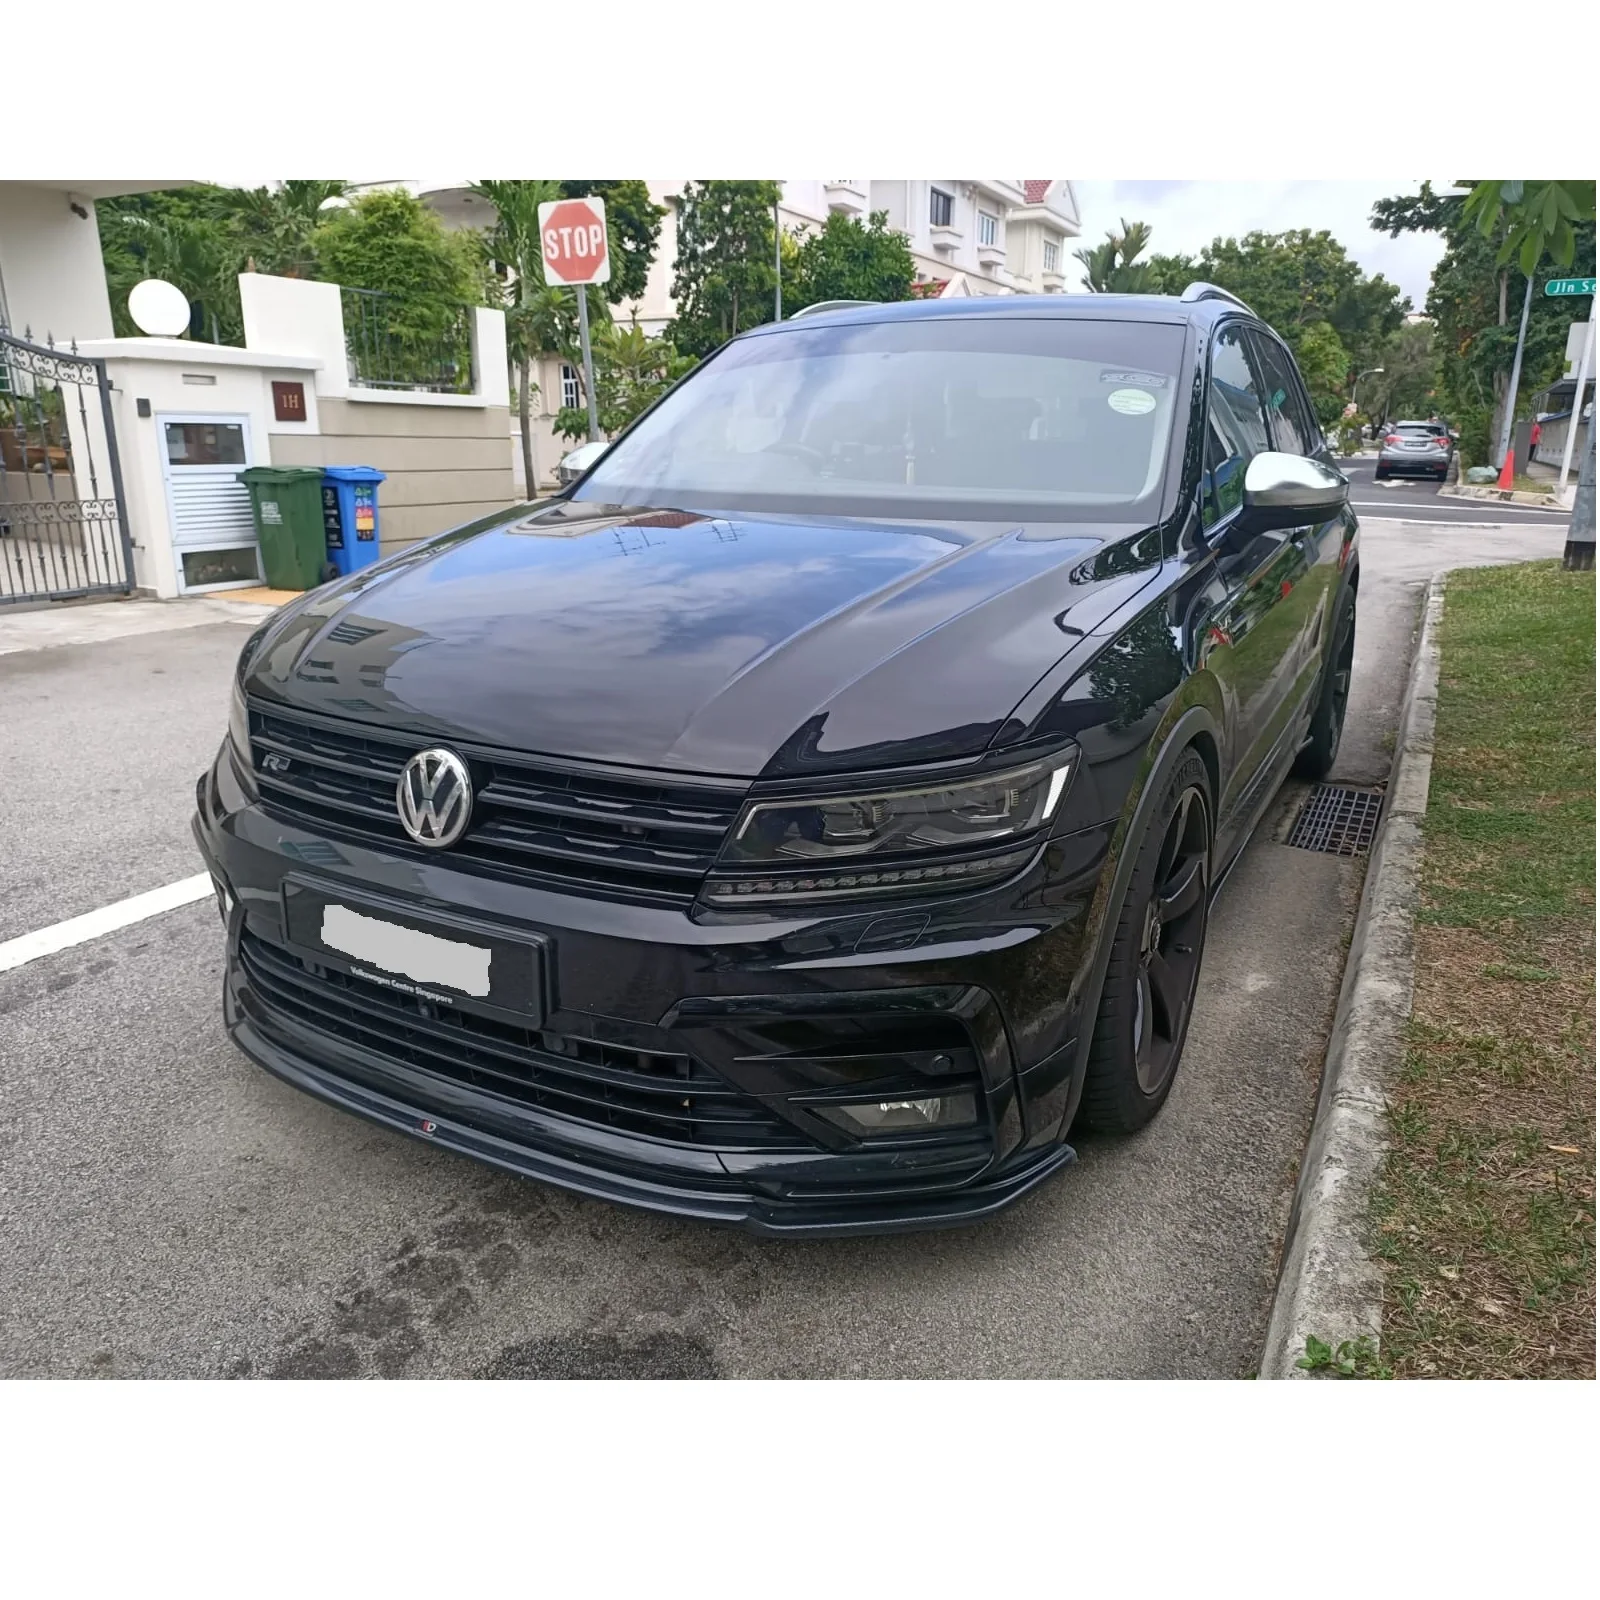 Best Used Electric Car Tiguan 2017 Use Gas Fuel With Mileage 27000km And Right Steering Buy Car Used Car Car Electric Used Car Product On Alibaba Com